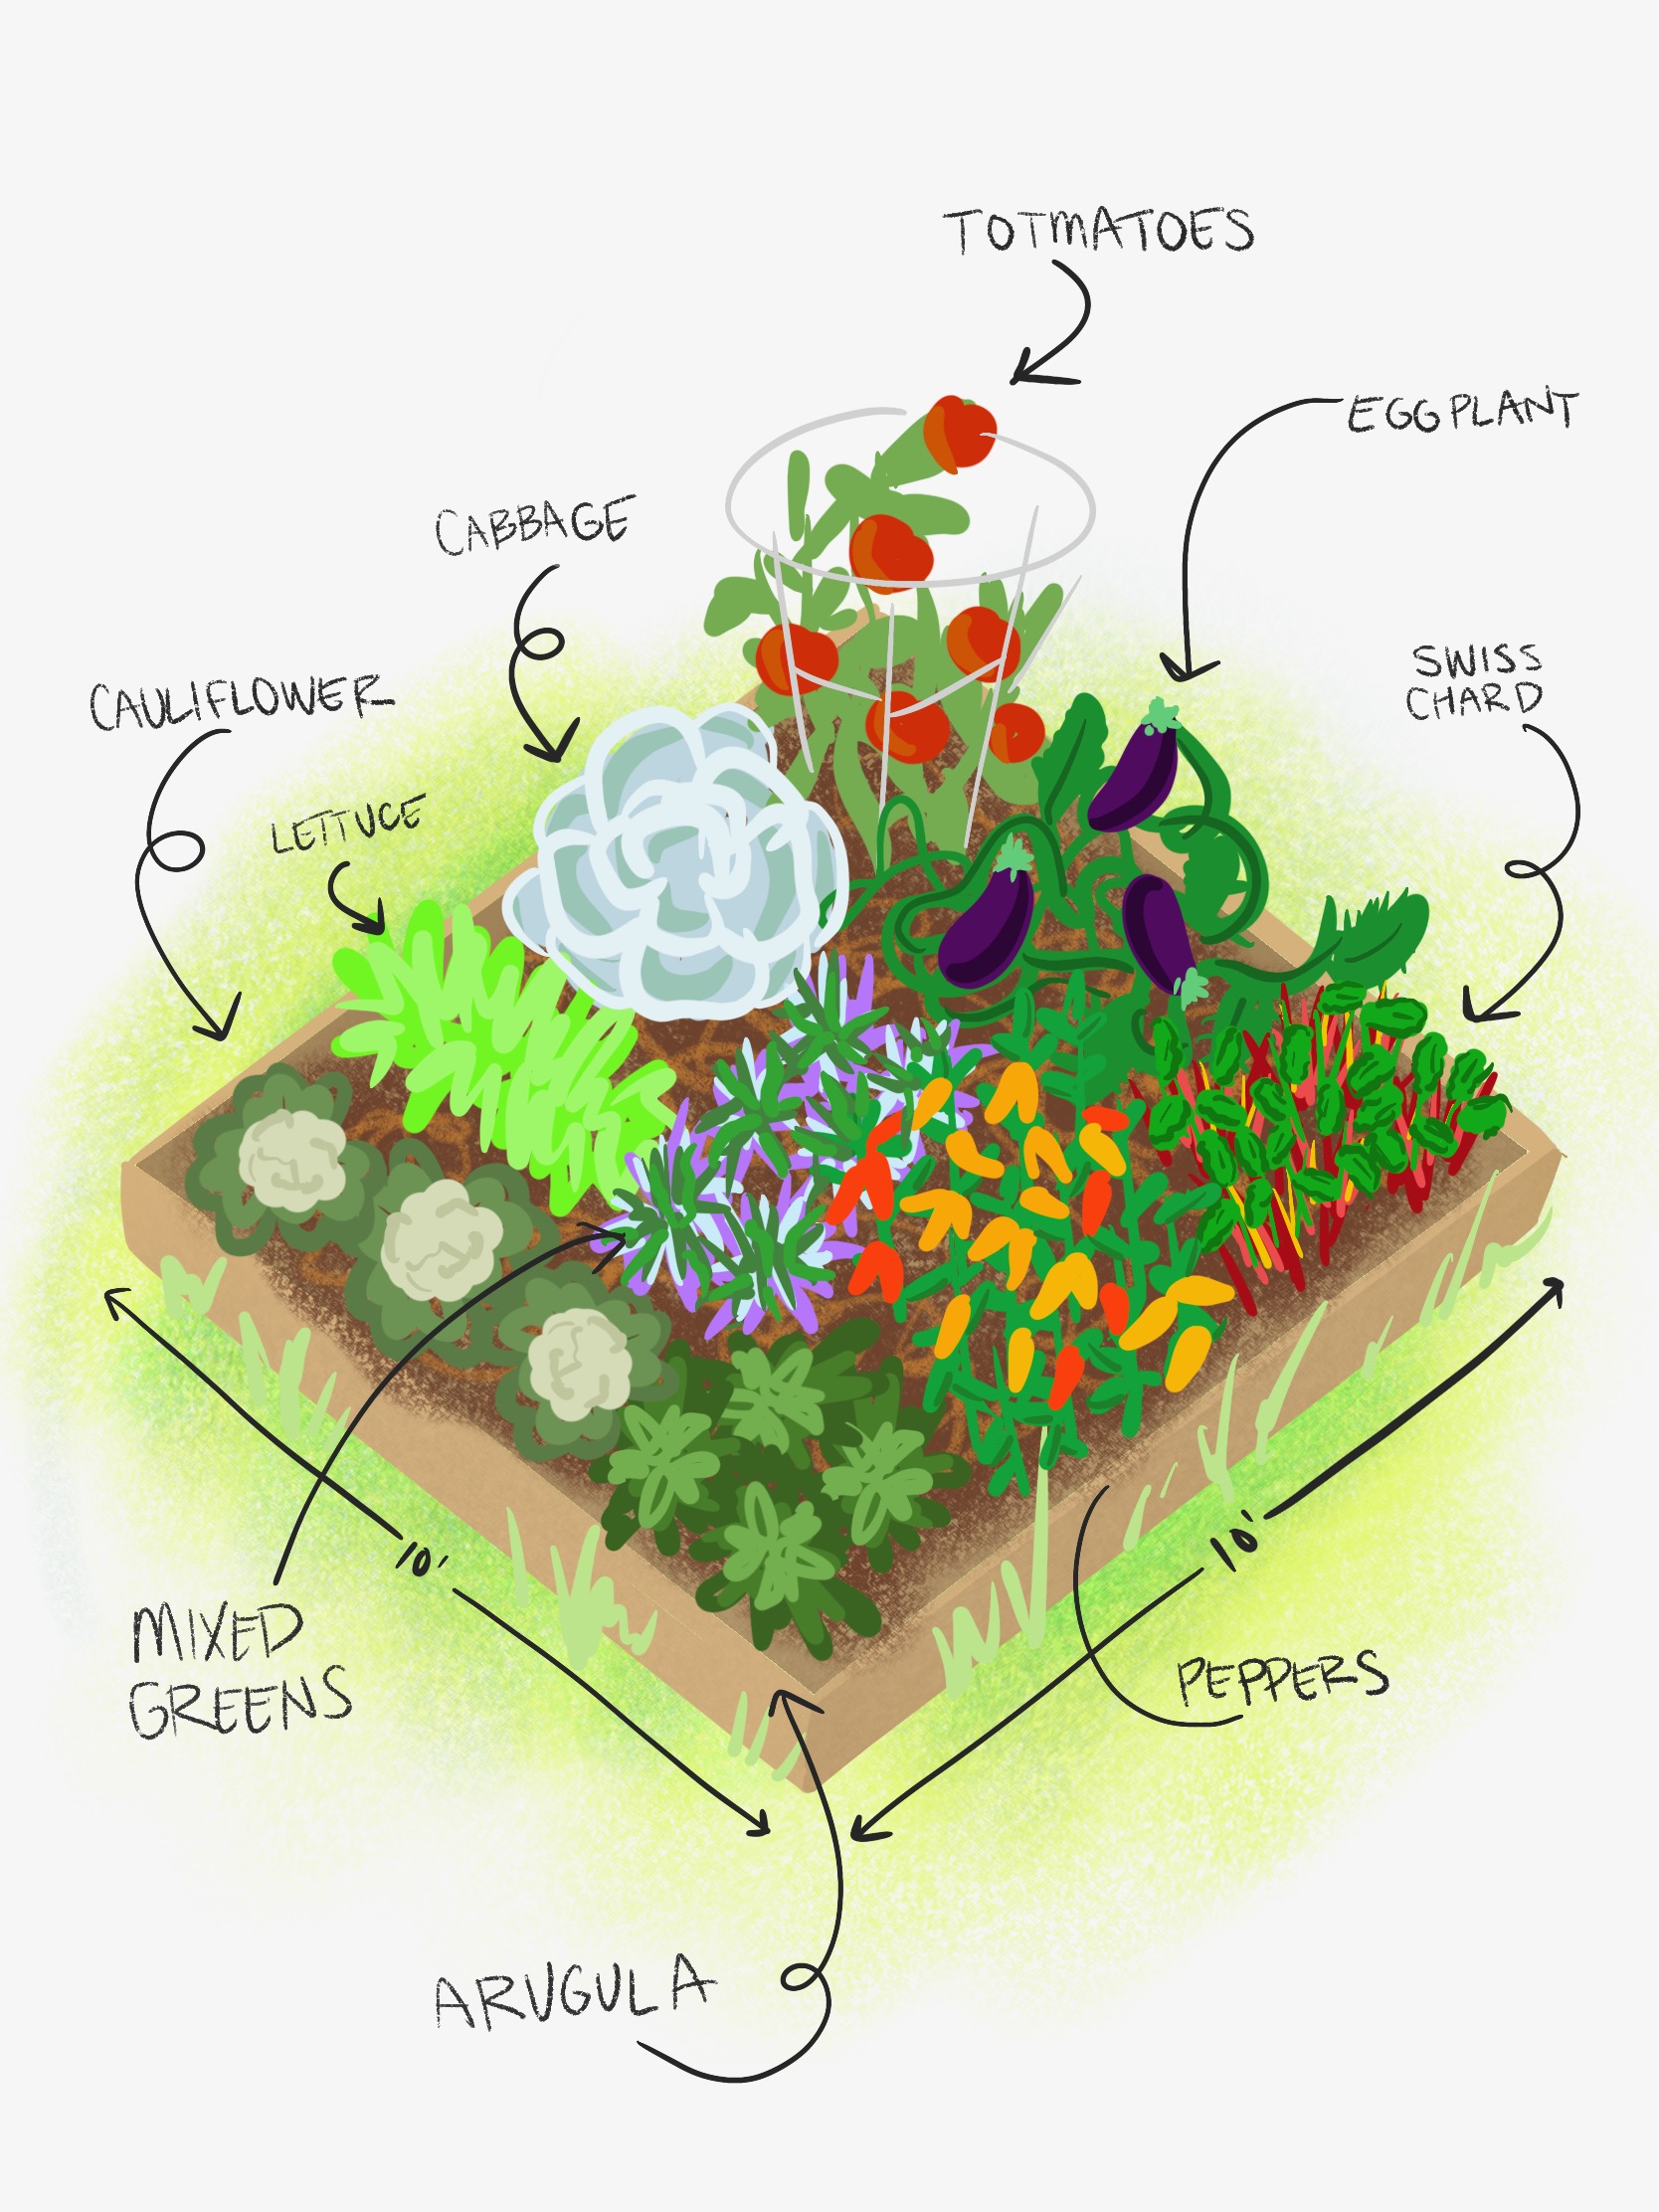 How To Plan For A Garden Vegging Out! Planning and Planting a Vegetable Garden - Tonkadale